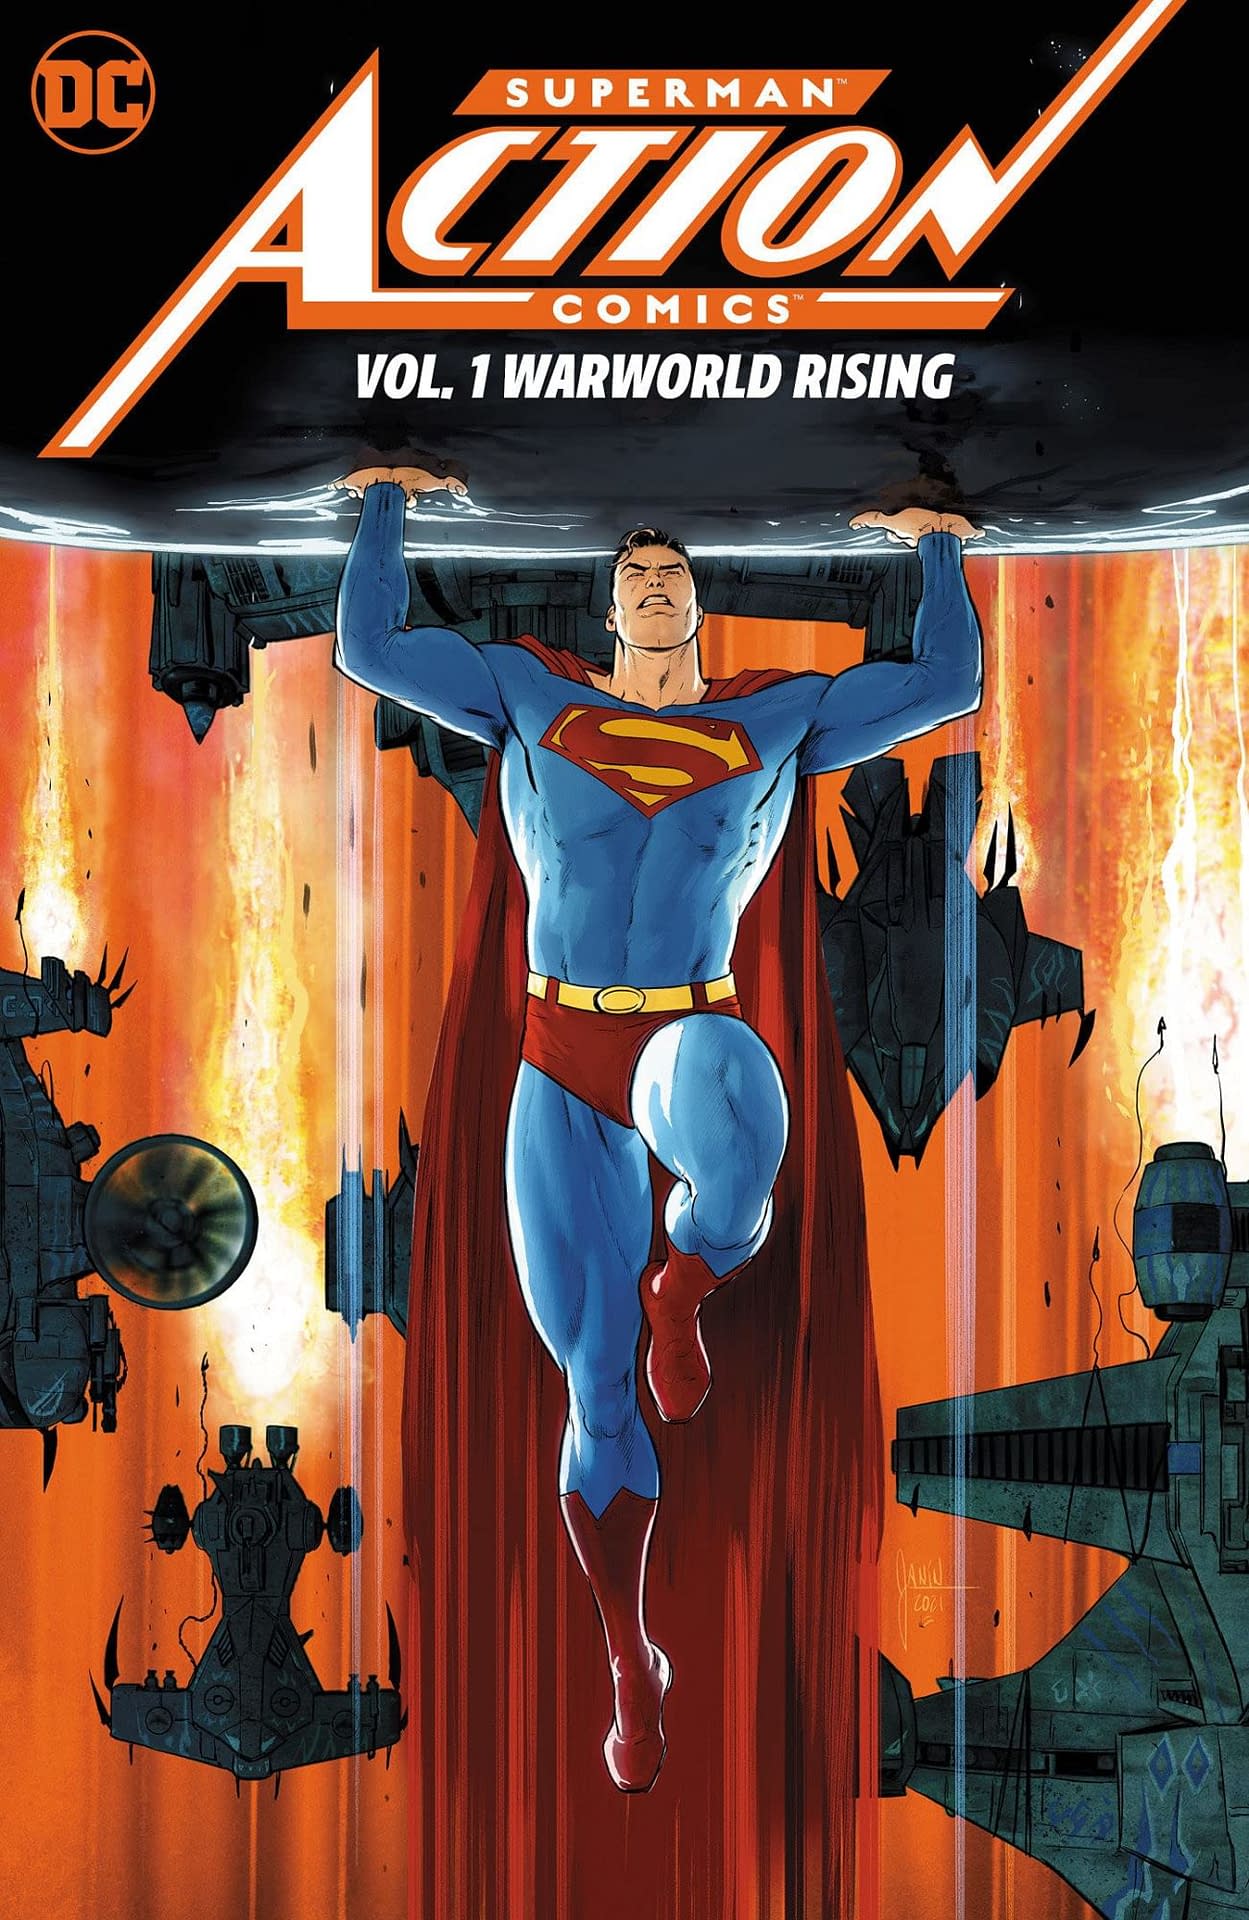 Random House Books for Young Readers Batman and Superman: SWAPPED